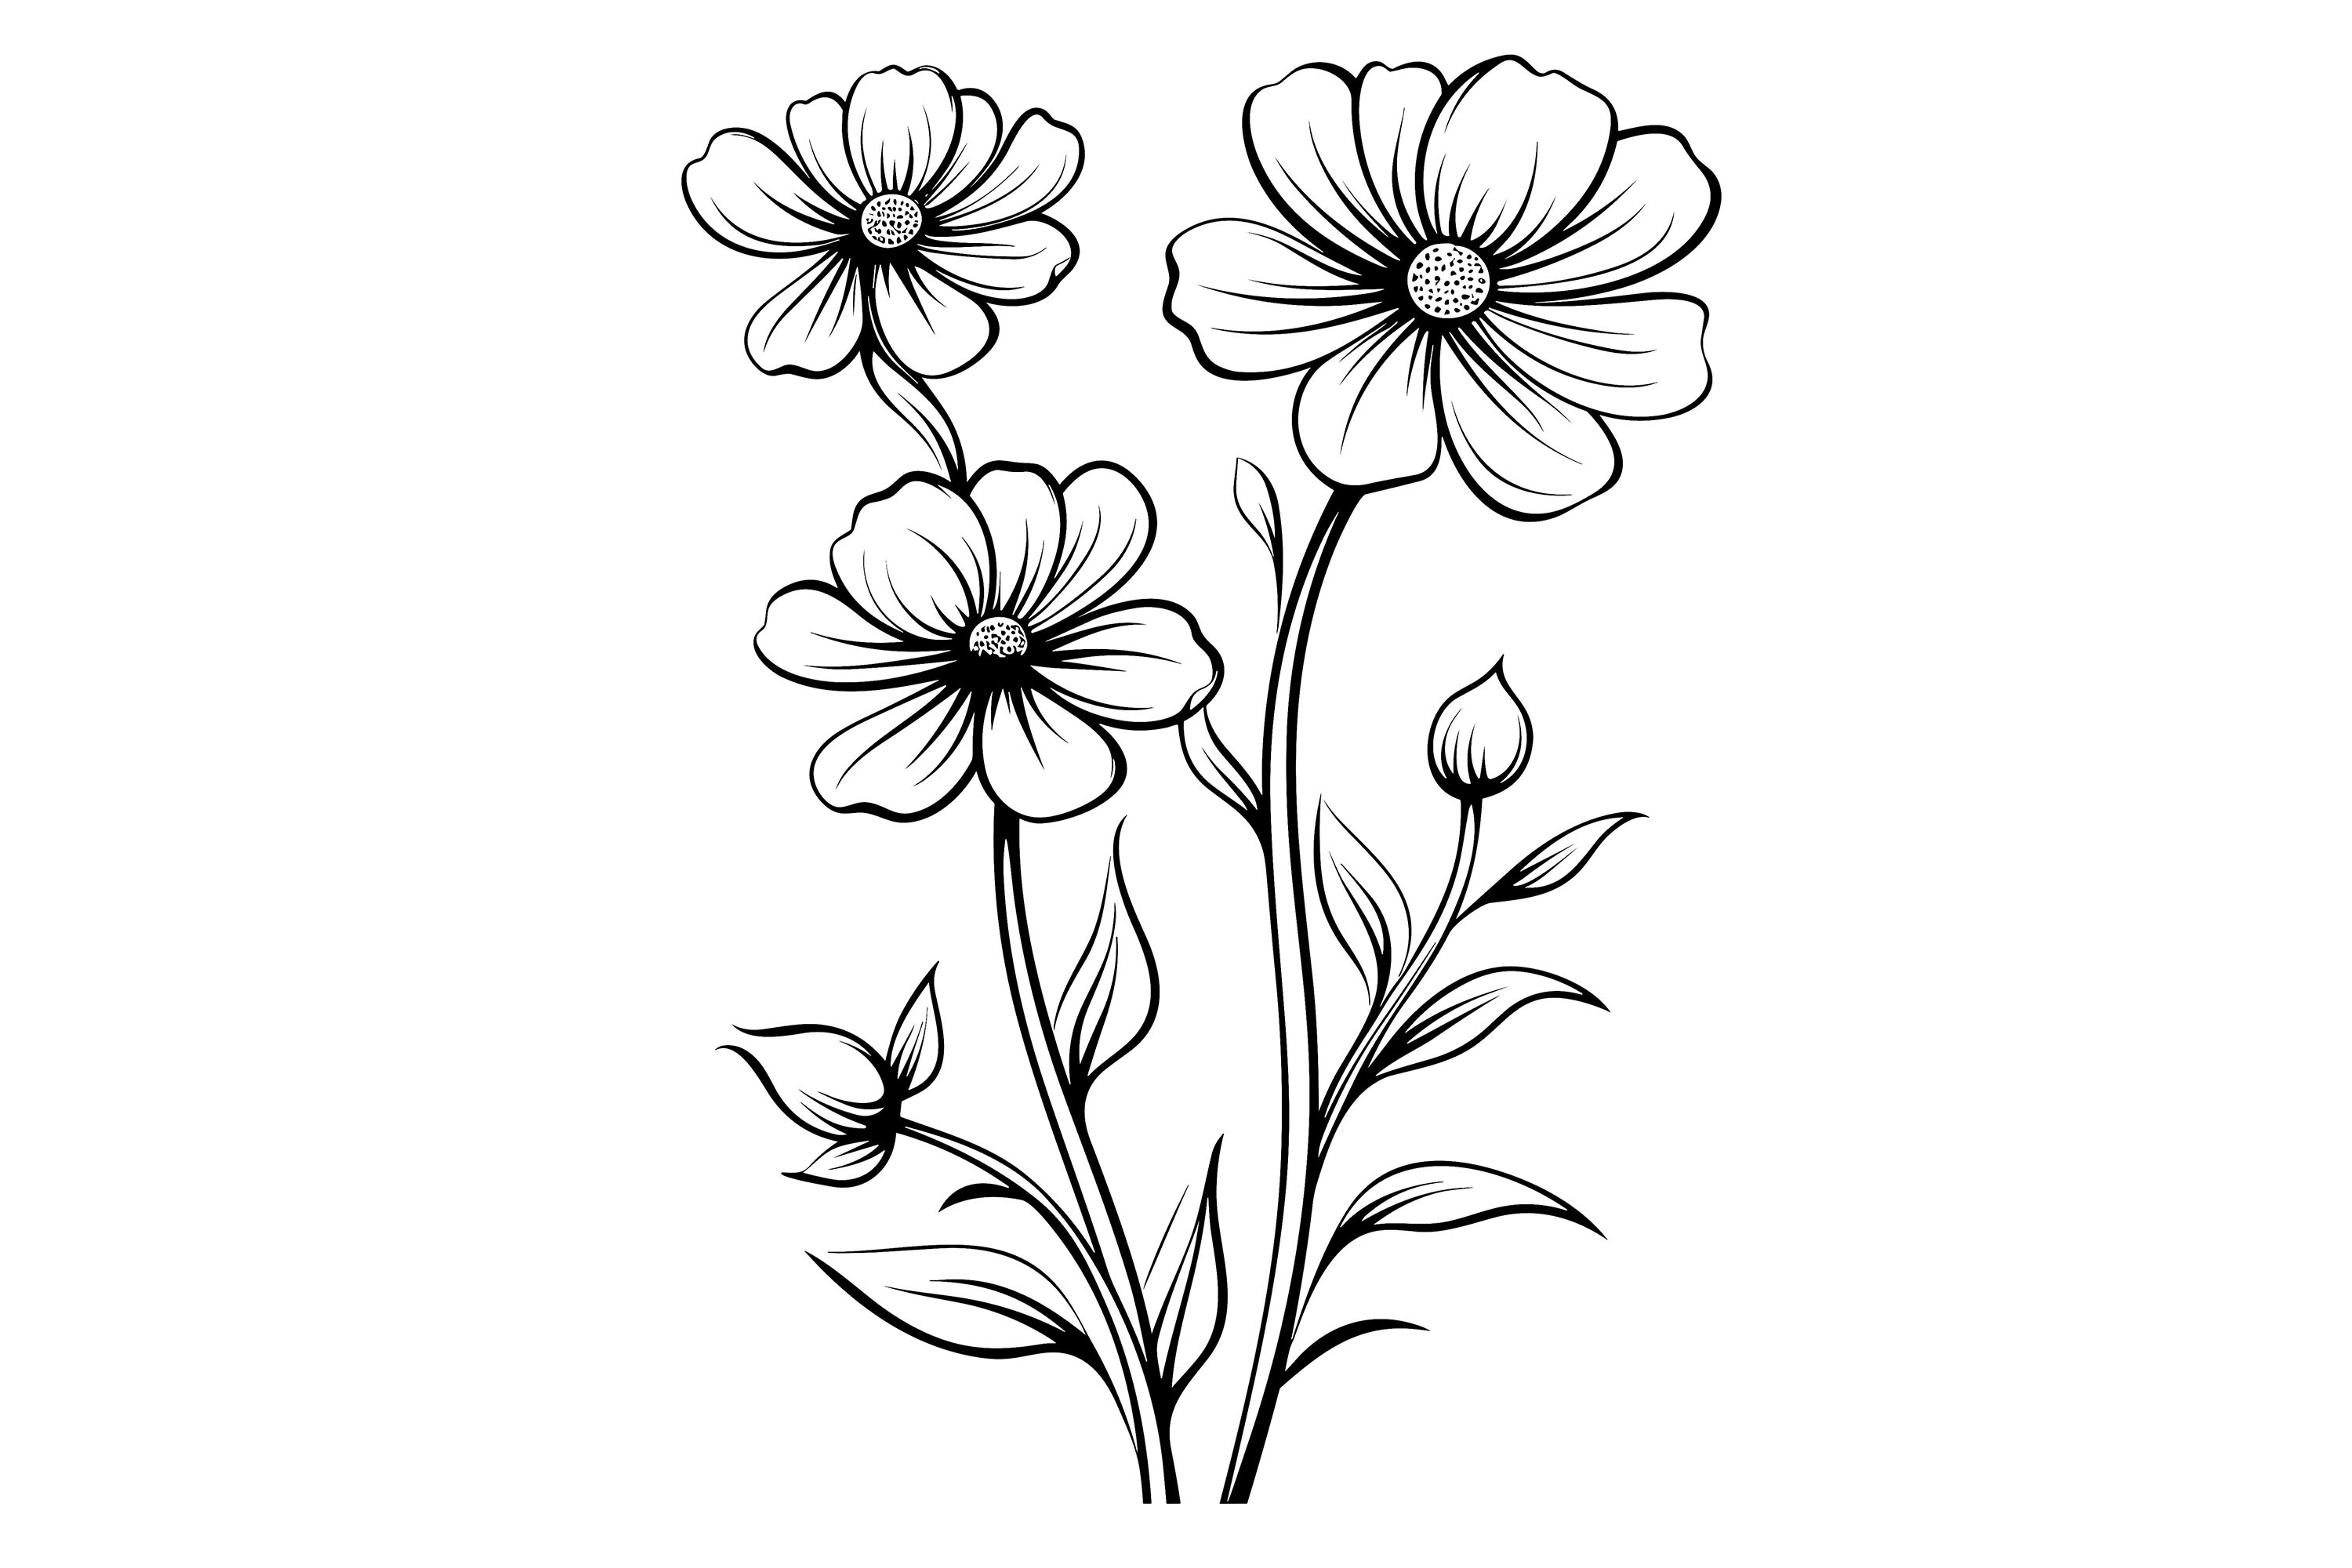 Flowers Clipart Graphic by Illustrately · Creative Fabrica